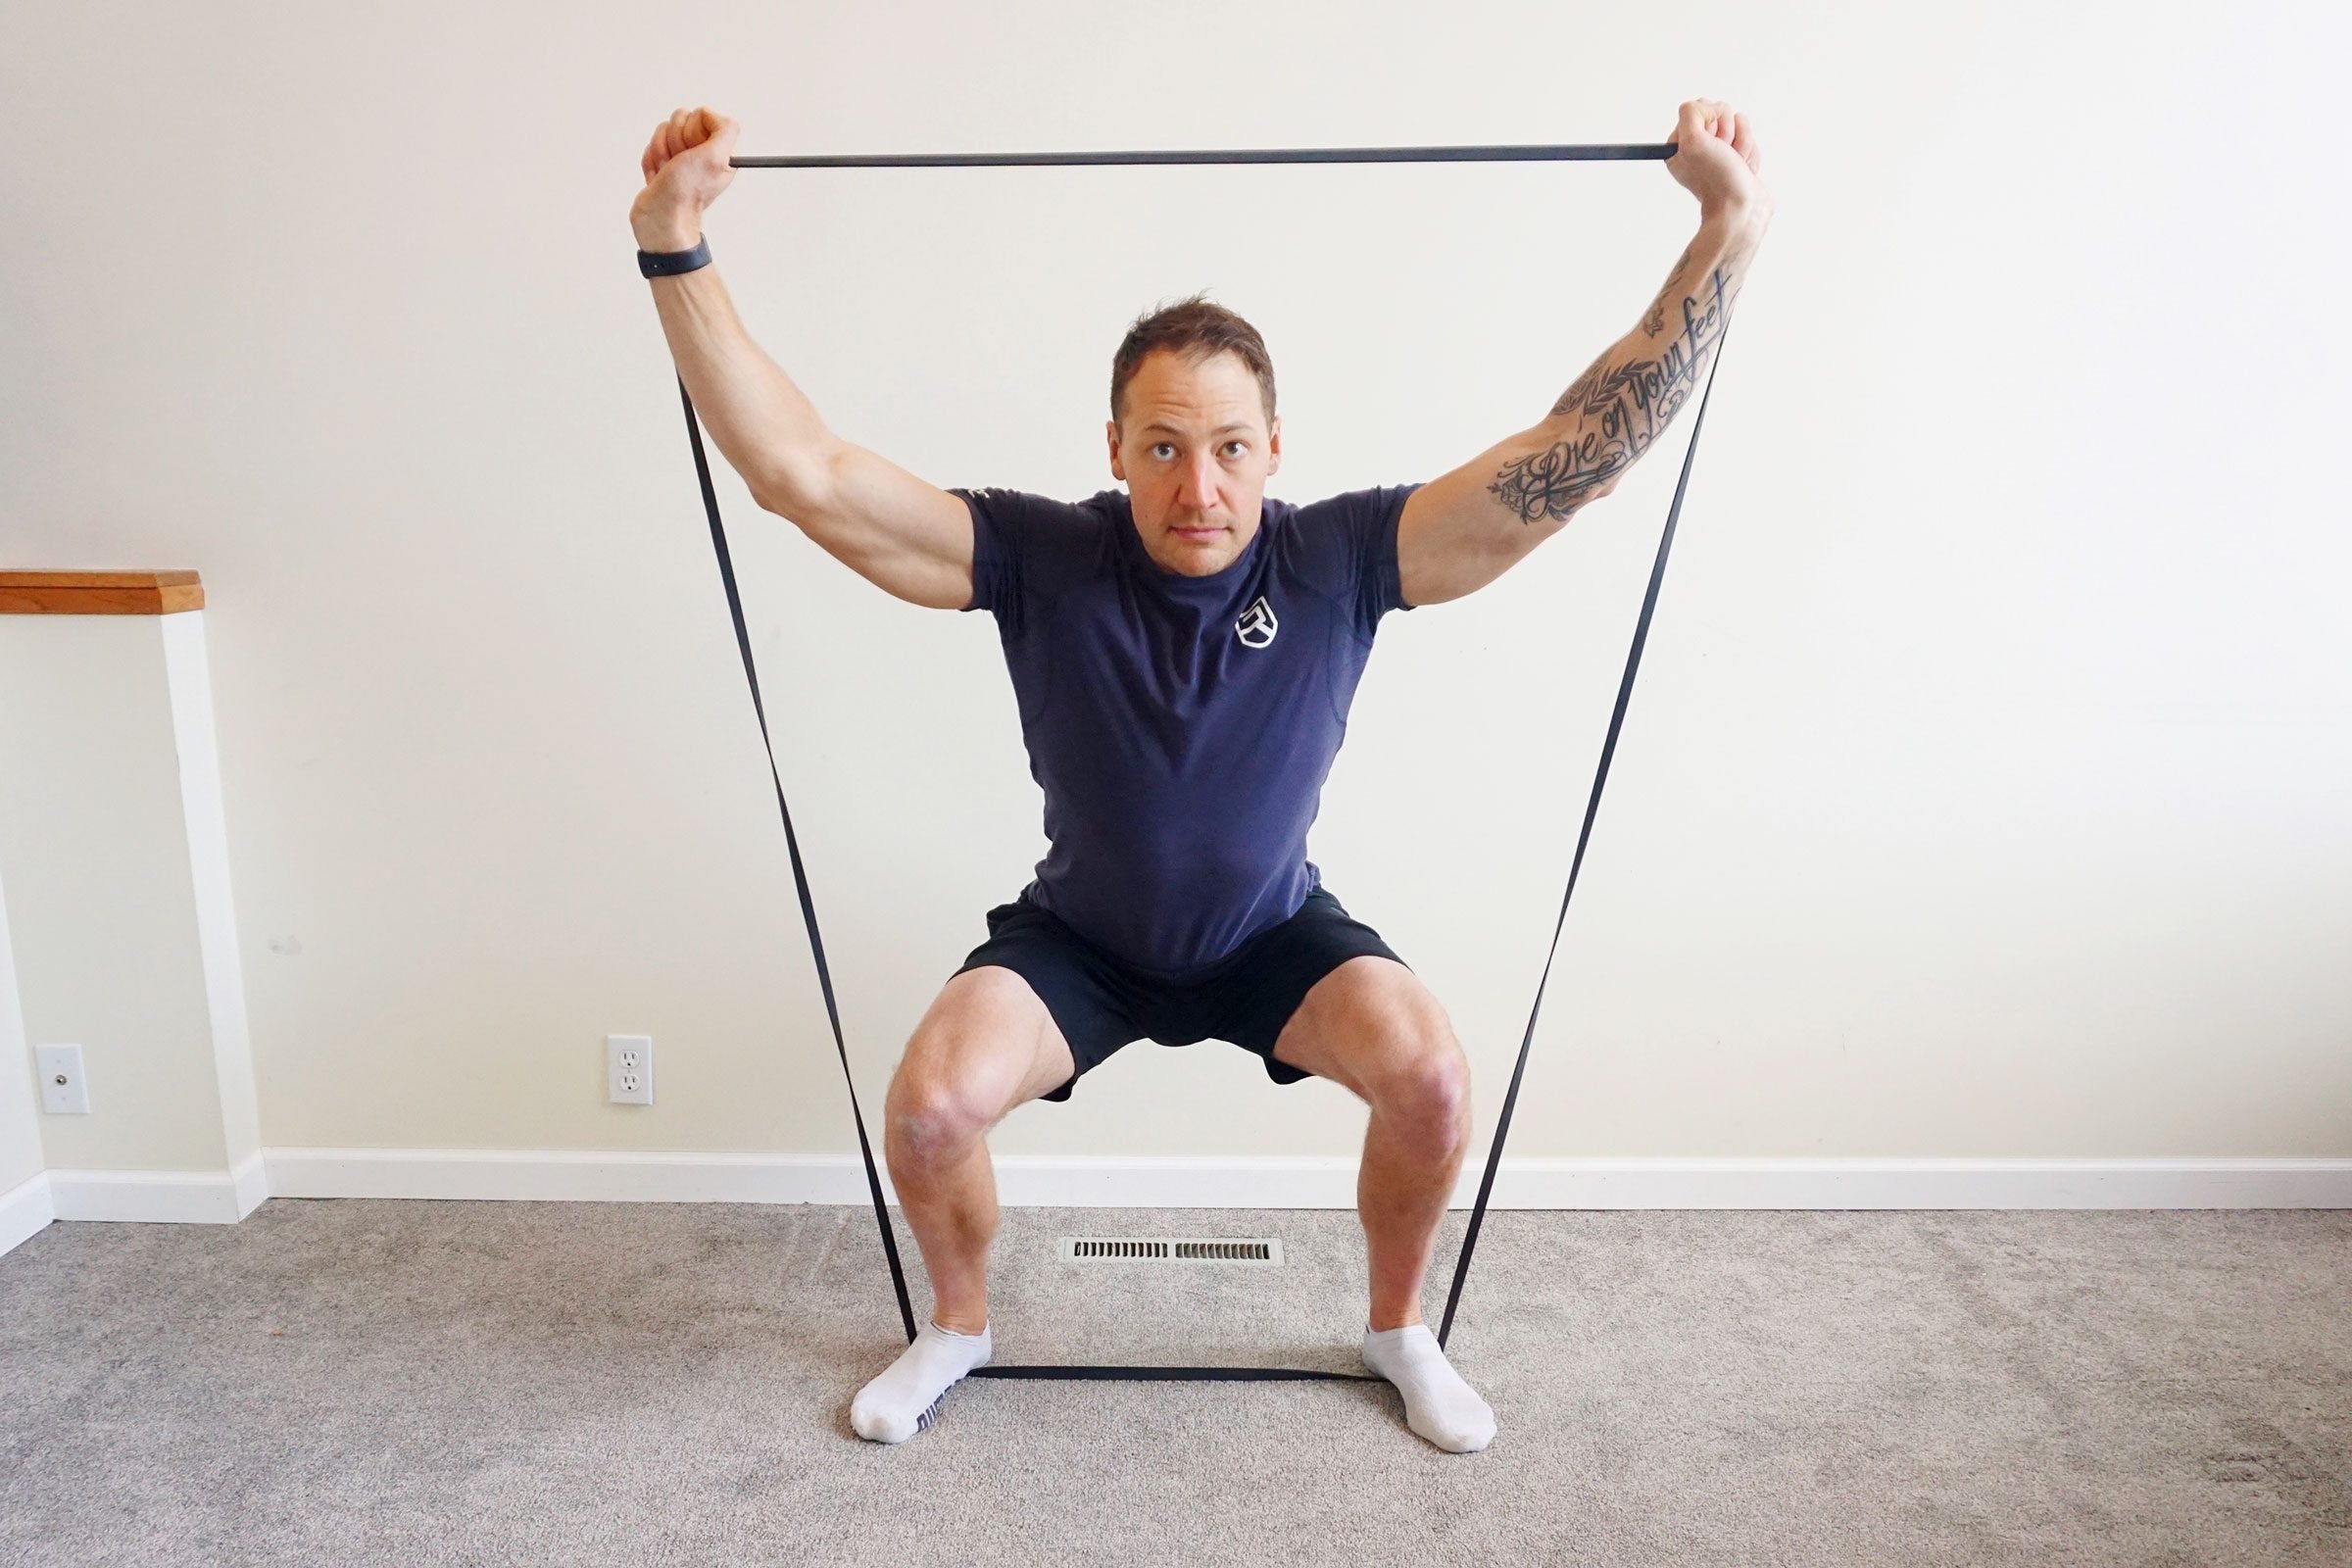 Try This Trainer's Full-Body Resistance Band Workout to Improve Your Body Shape and Strength